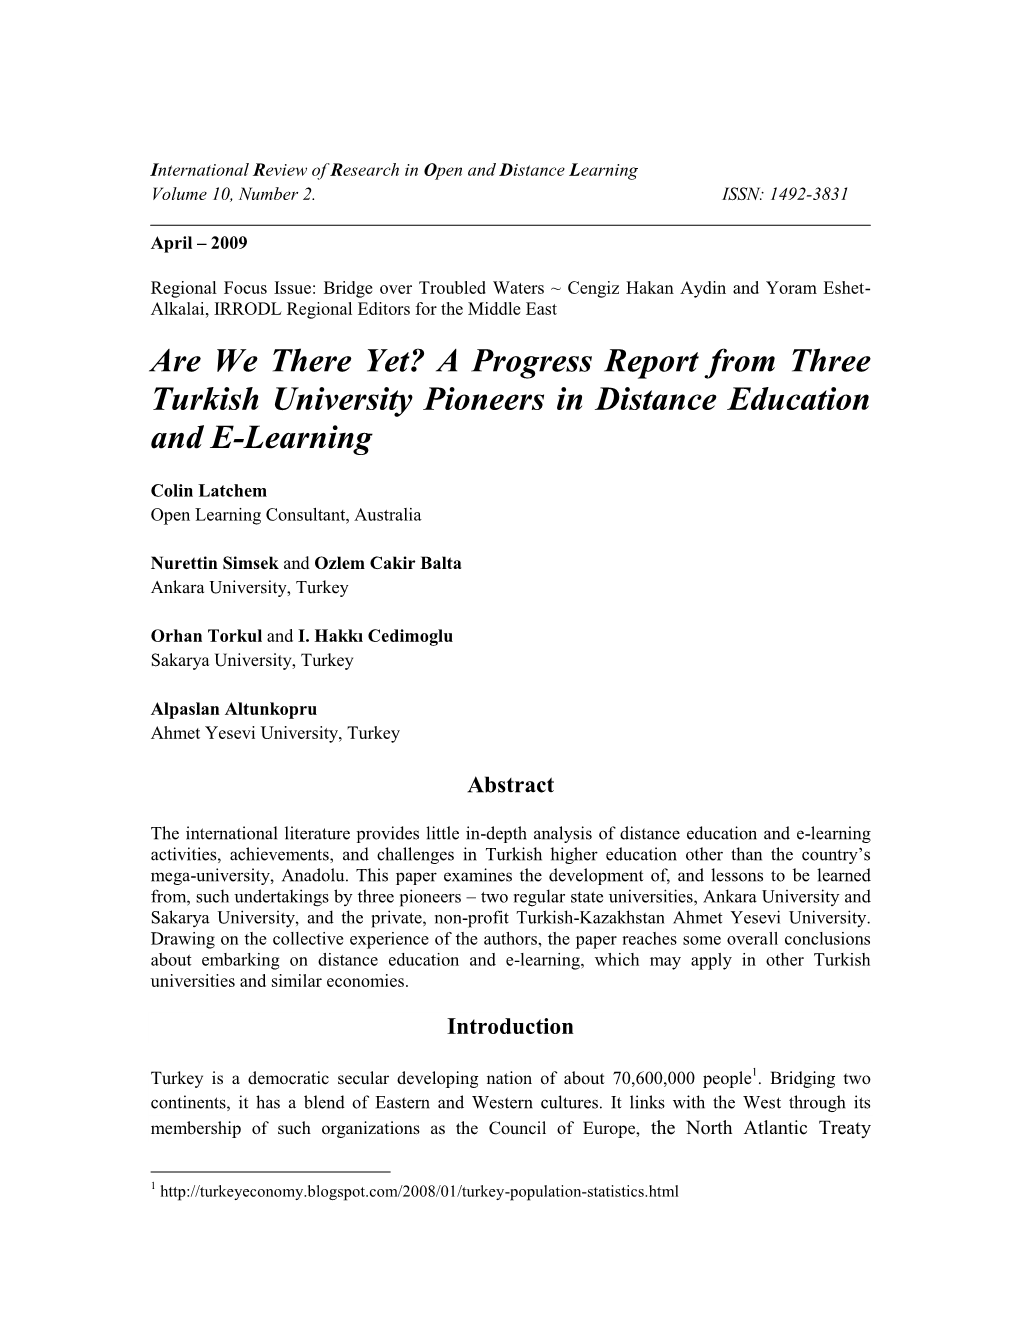 Are We There Yet? a Progress Report from Three Turkish University Pioneers in Distance Education and E-Learning